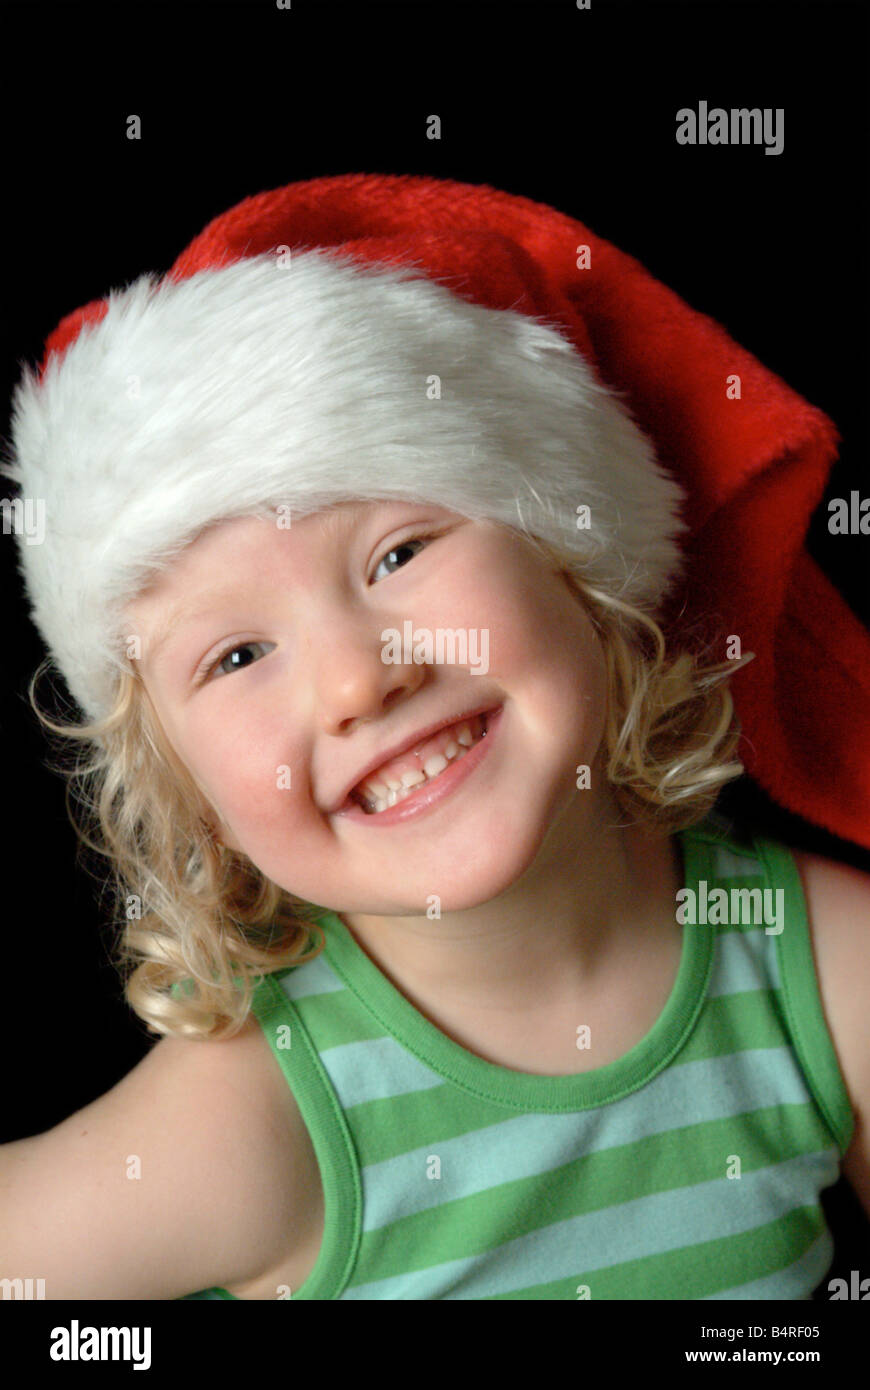 White girl wearing a red christmas hat and green stripy vest. Stock Photo